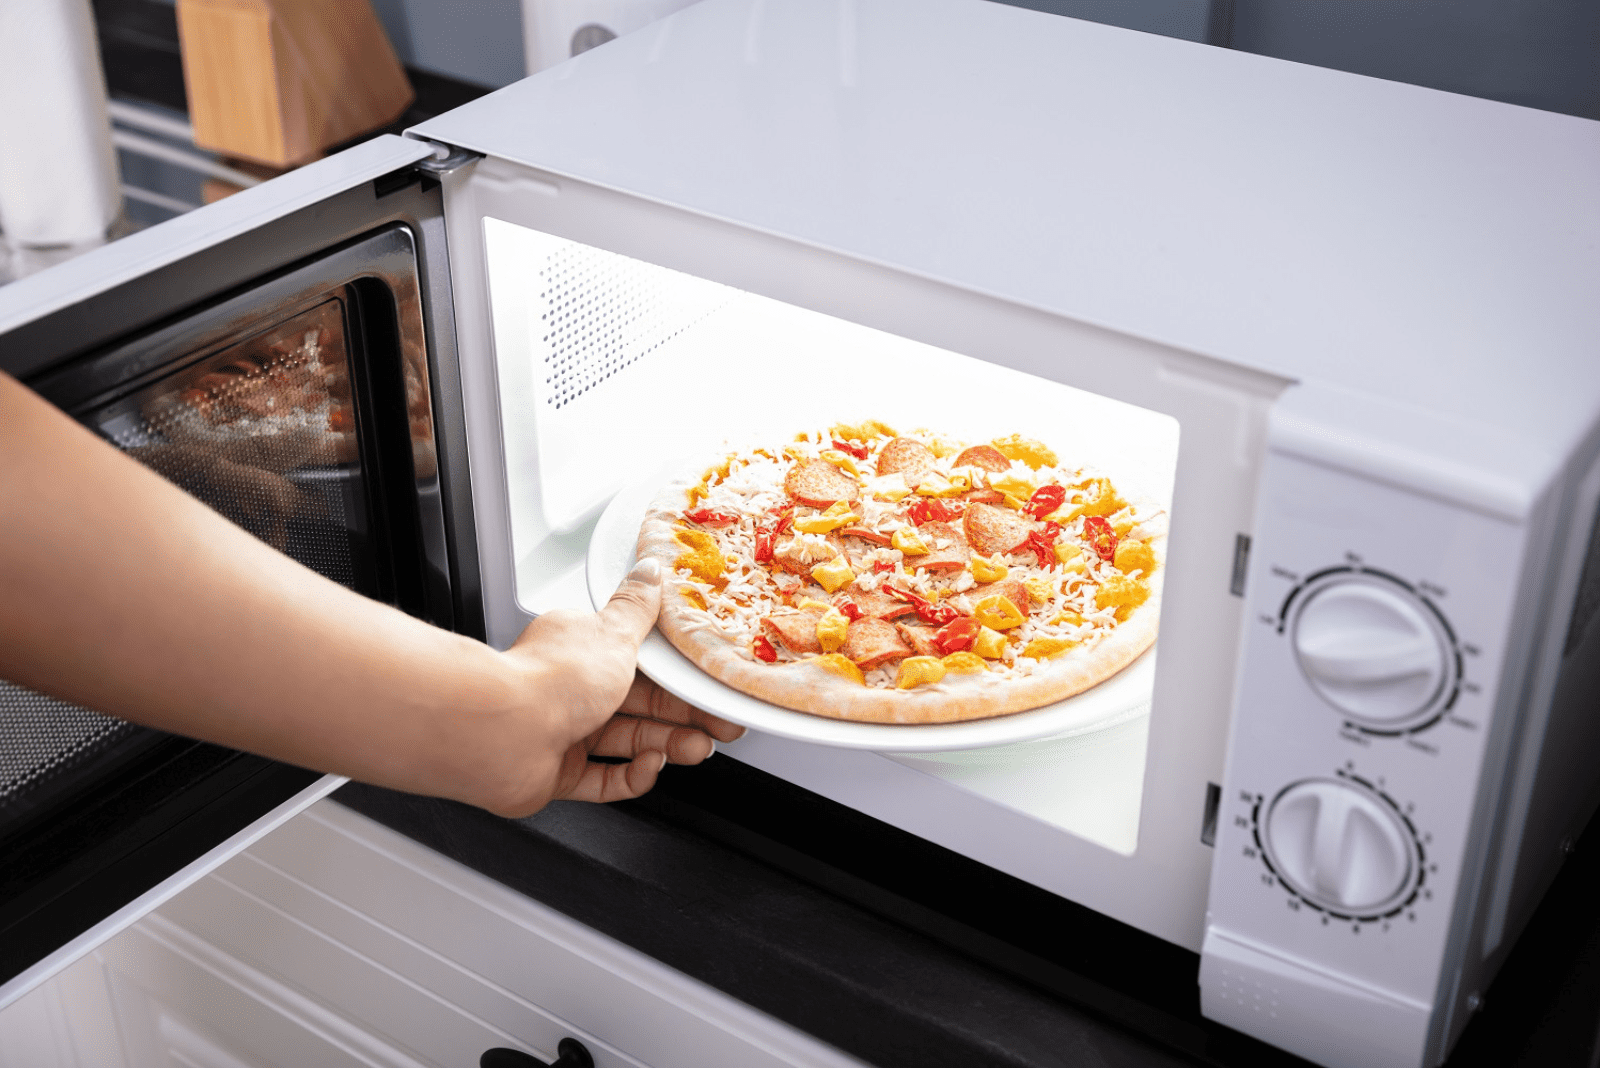 the woman puts the pizza in the microwave